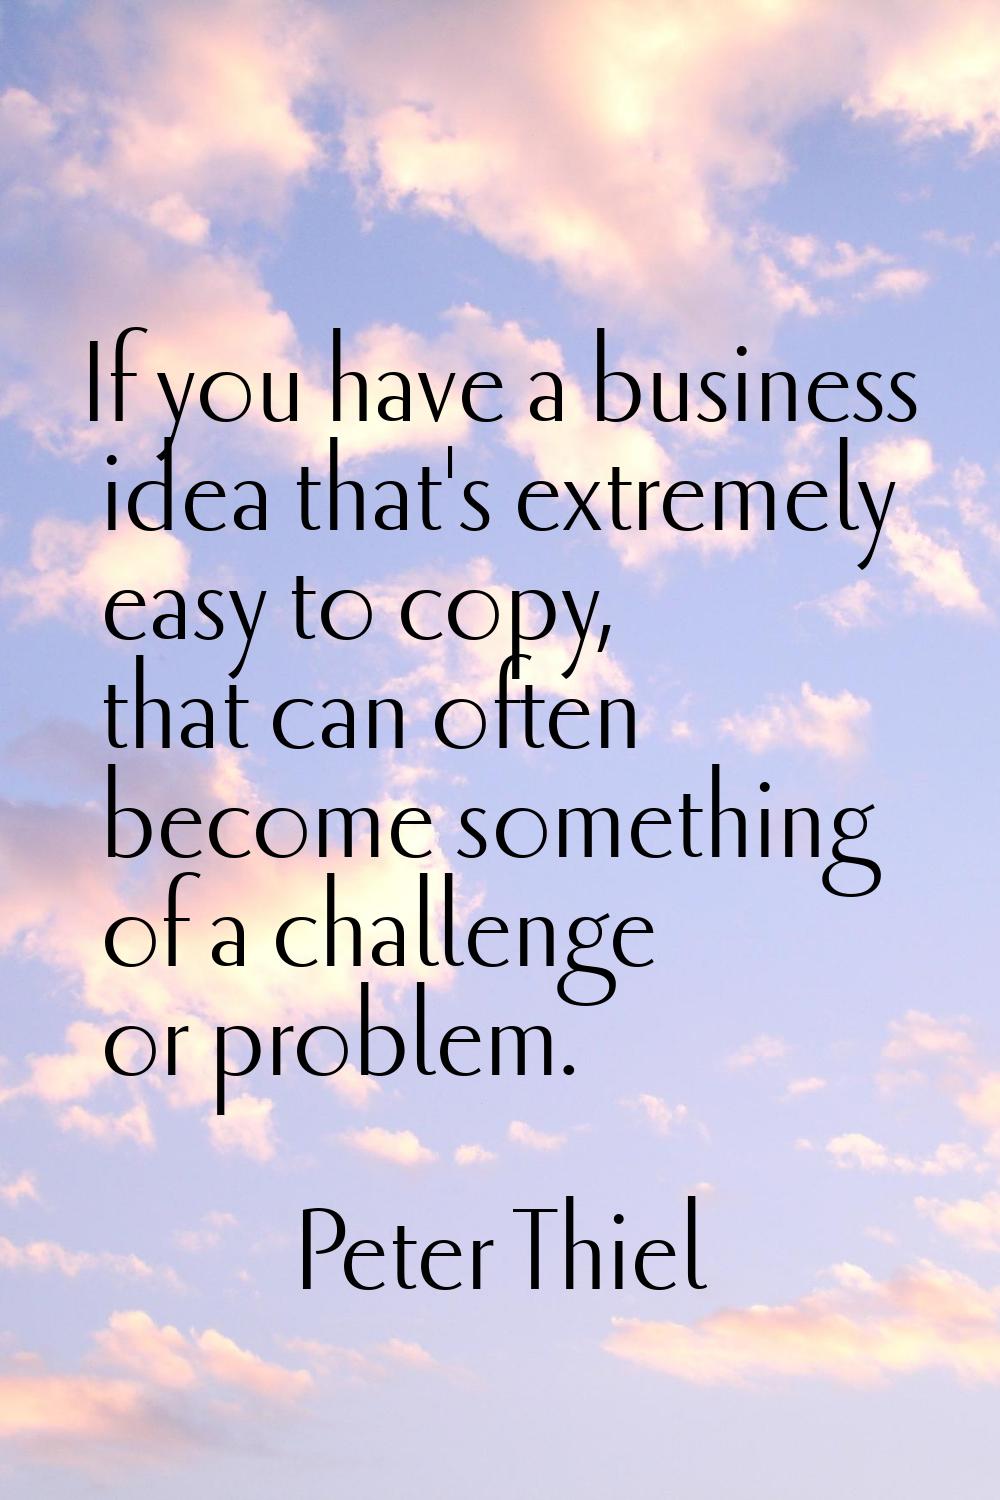 If you have a business idea that's extremely easy to copy, that can often become something of a cha